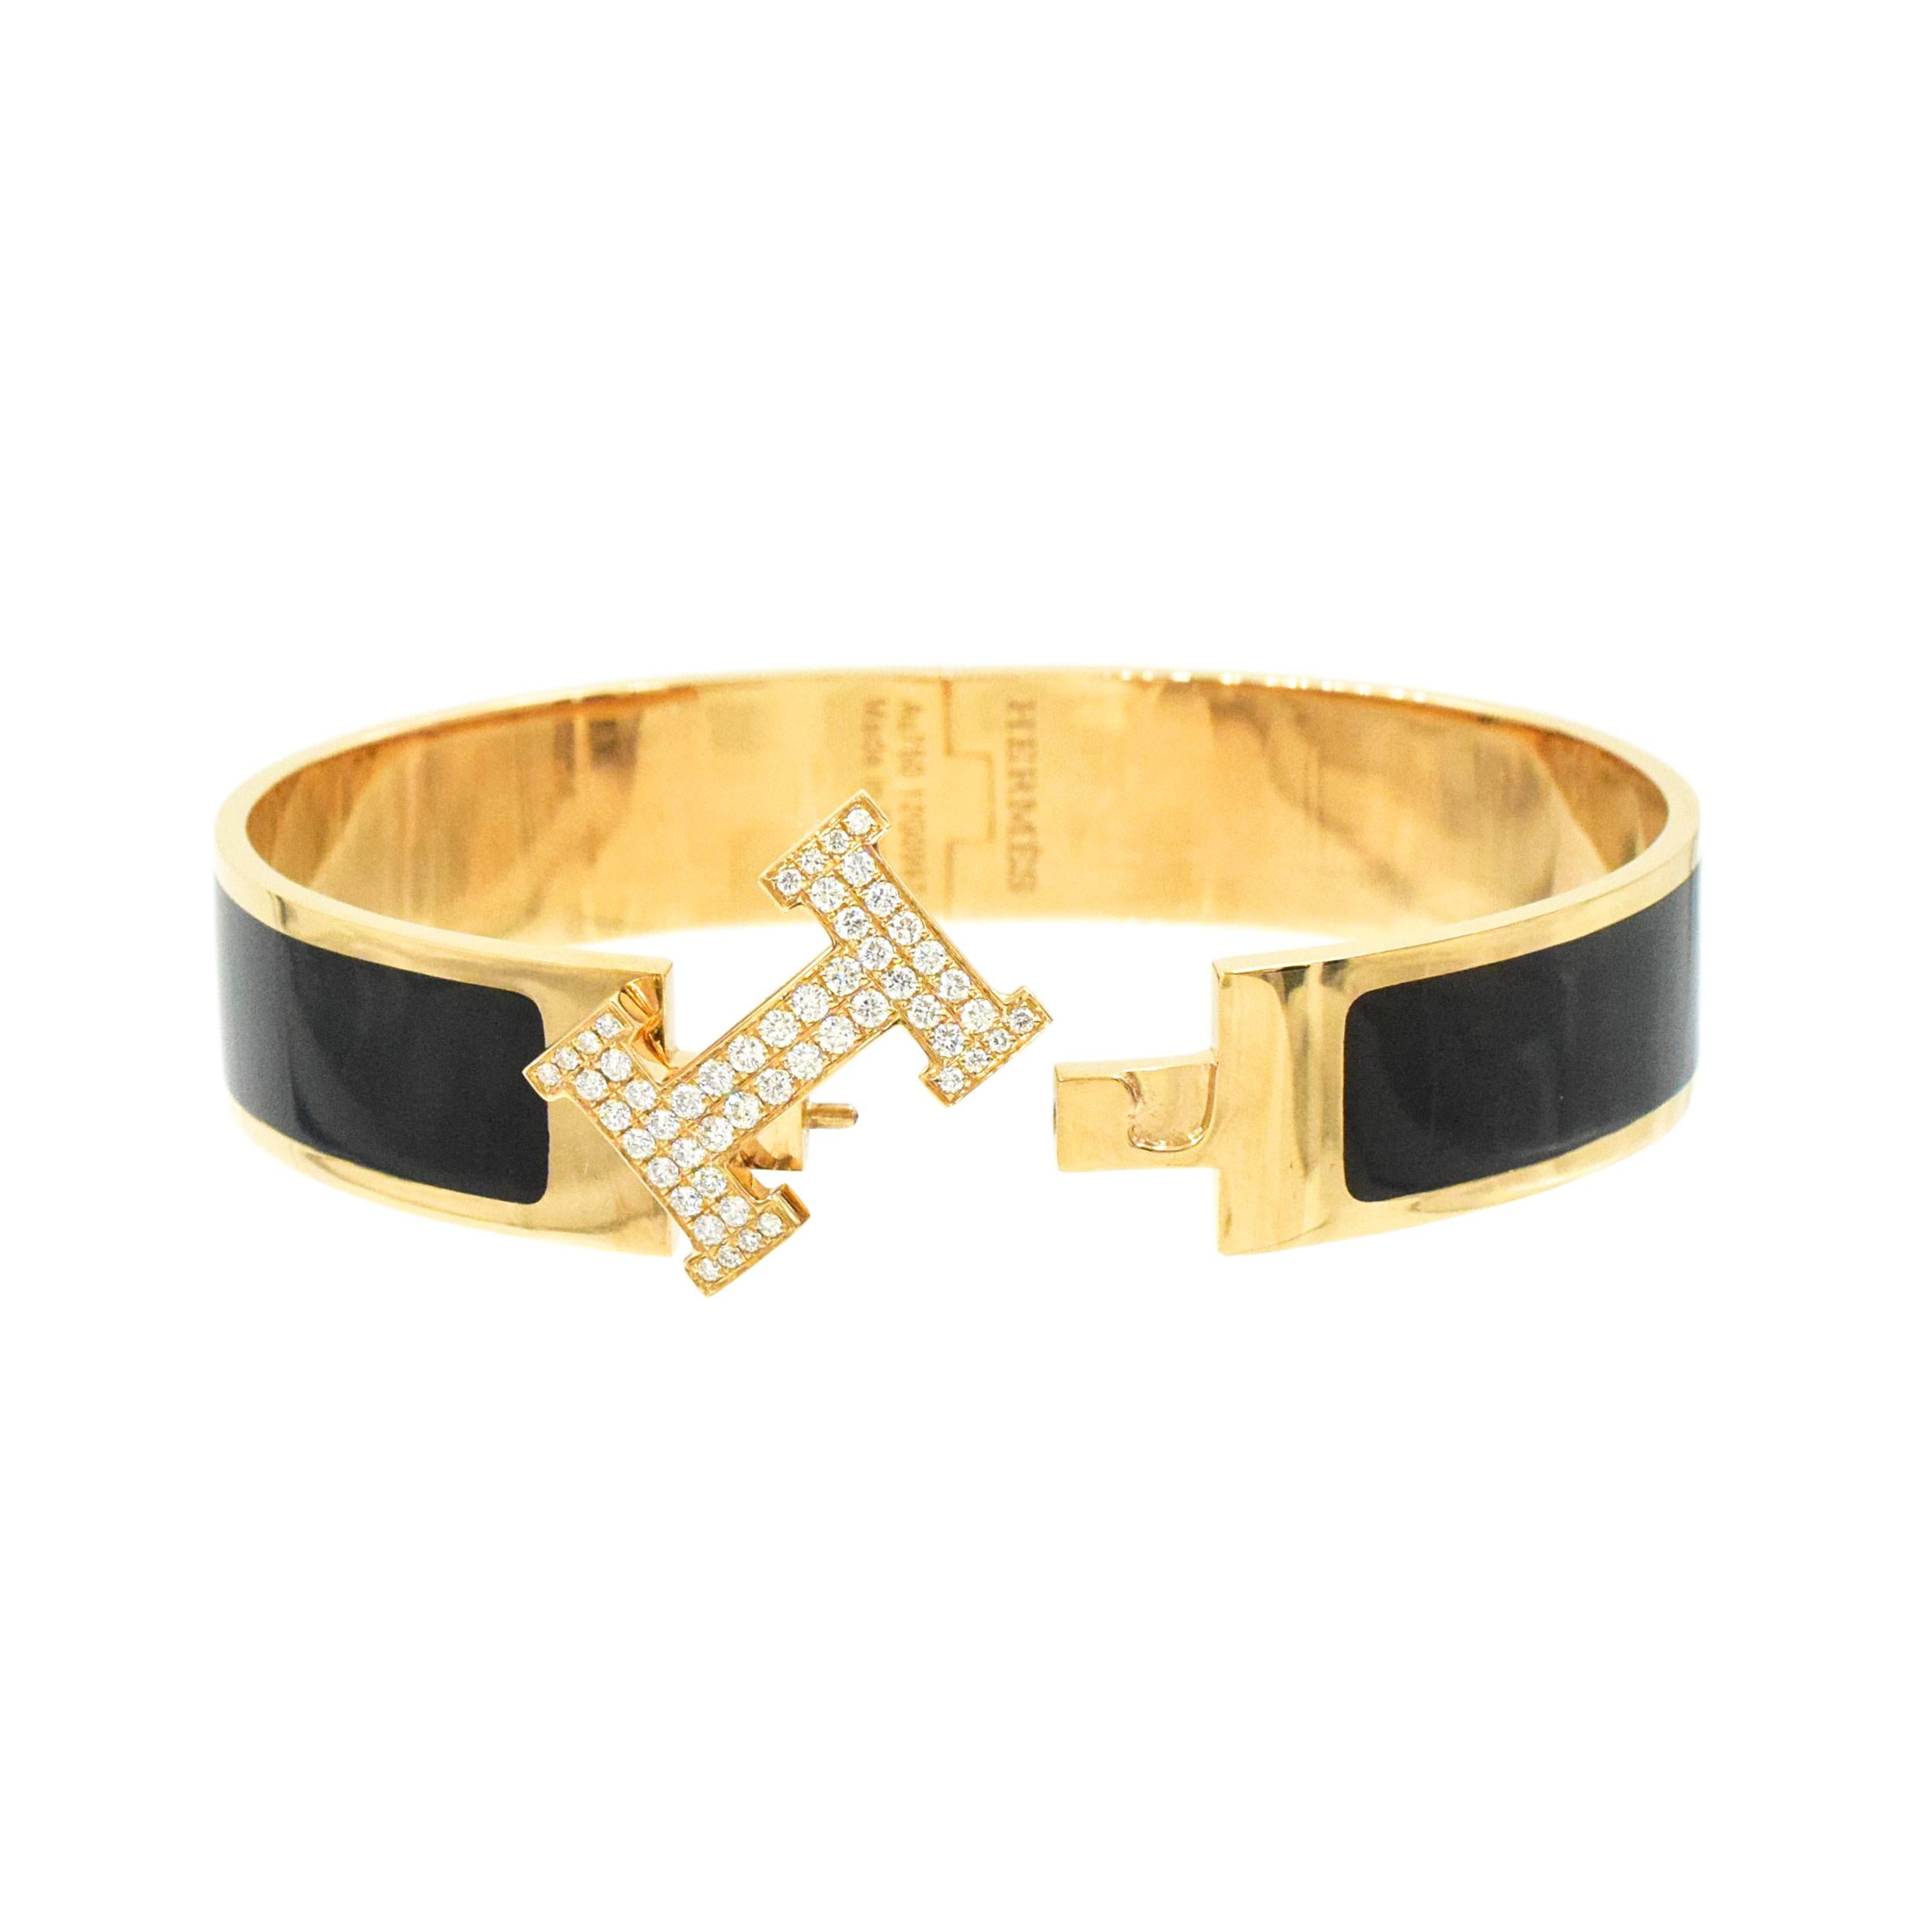 Hermes Clic Clac H Diamond and Black Enamel Bangle Bracelet In Excellent Condition For Sale In New York, NY